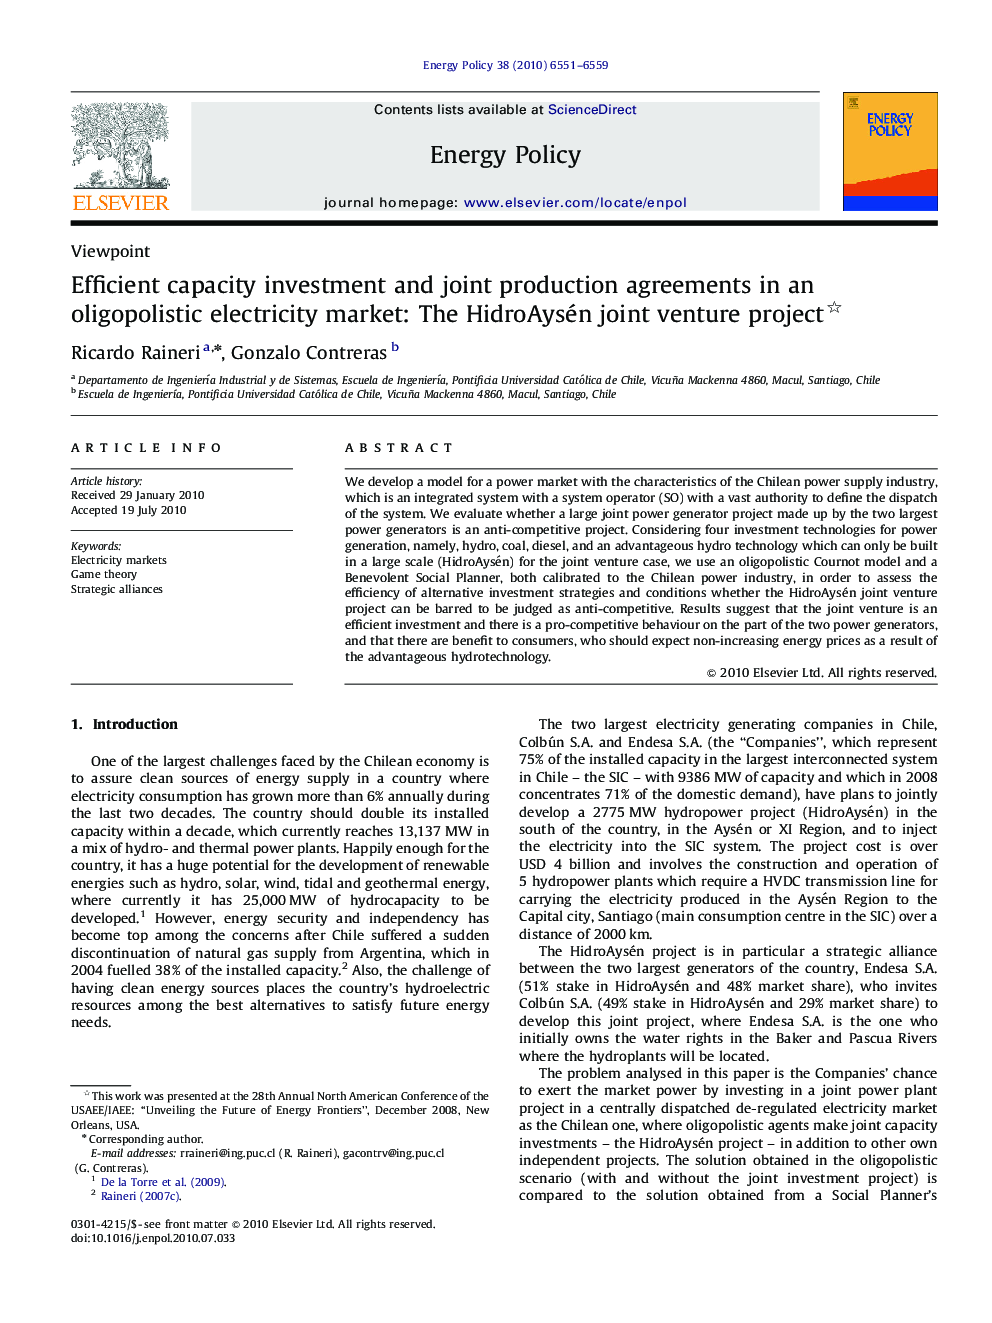 Efficient capacity investment and joint production agreements in an oligopolistic electricity market: The HidroAysén joint venture project 